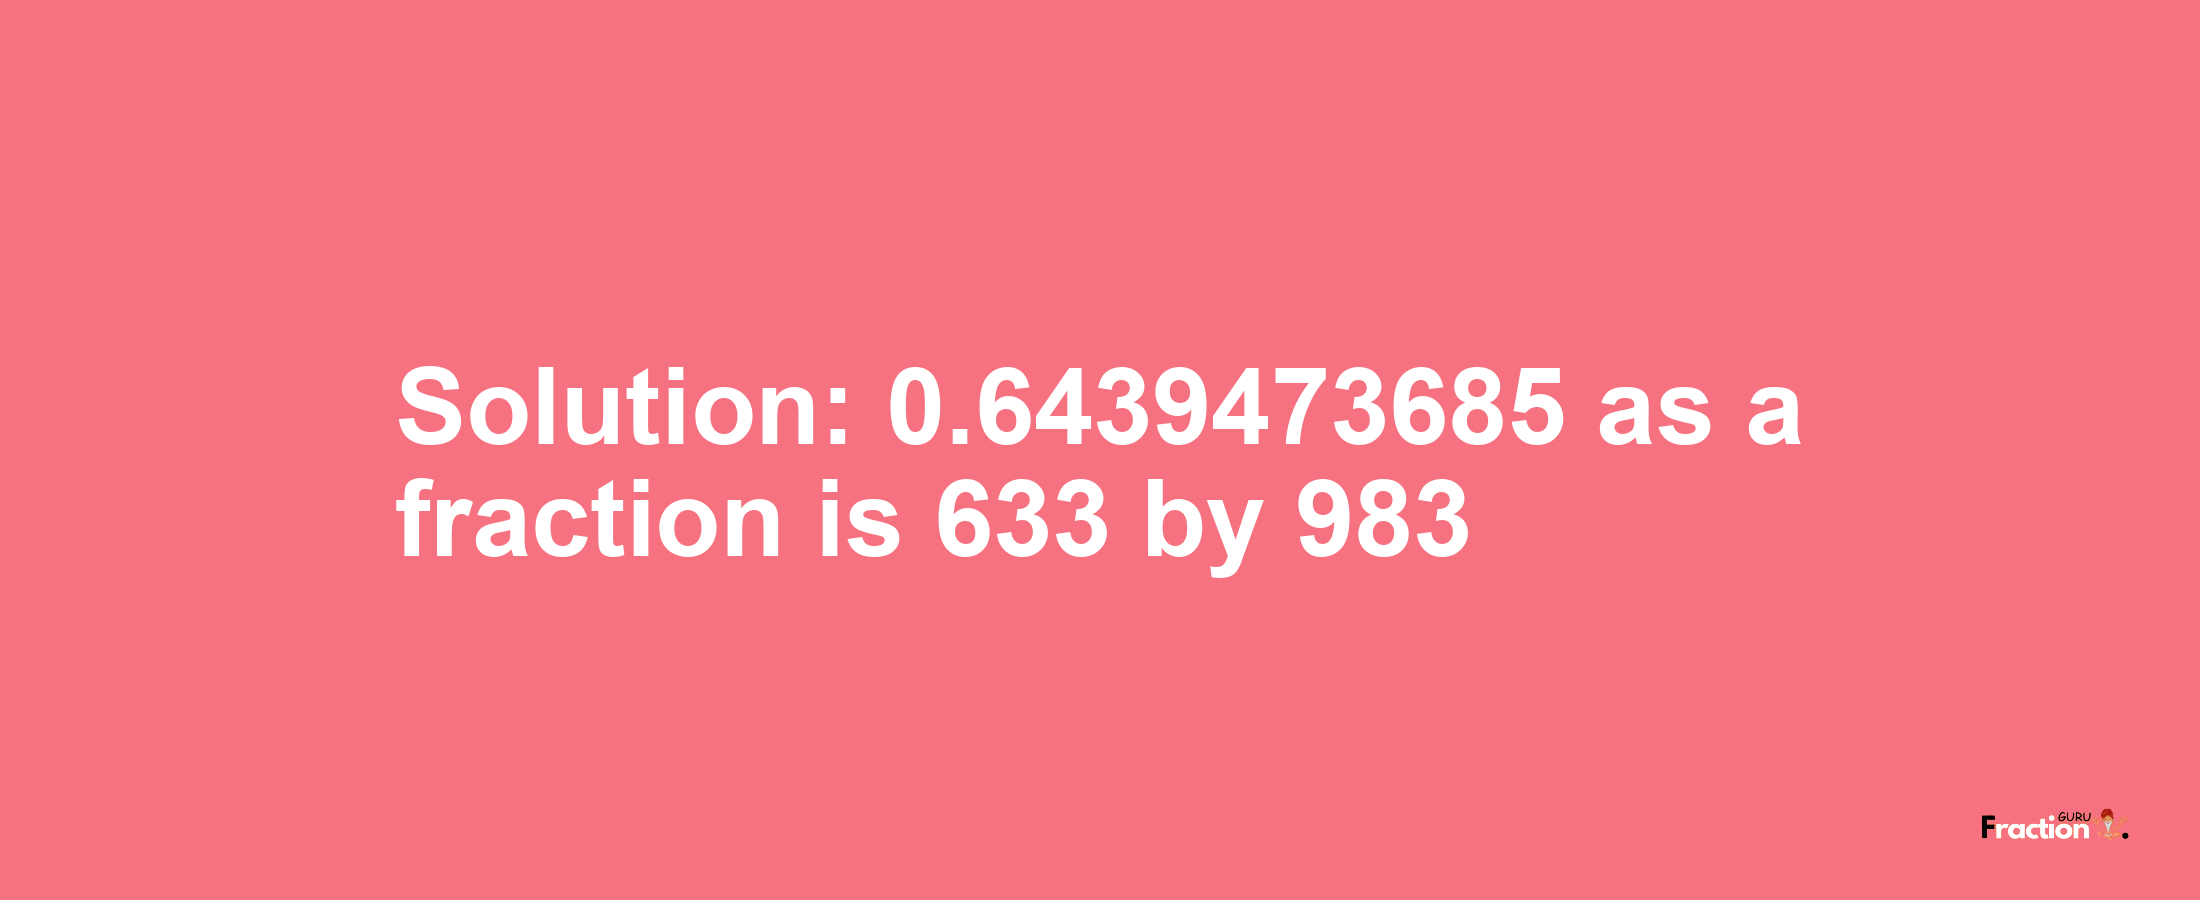 Solution:0.6439473685 as a fraction is 633/983